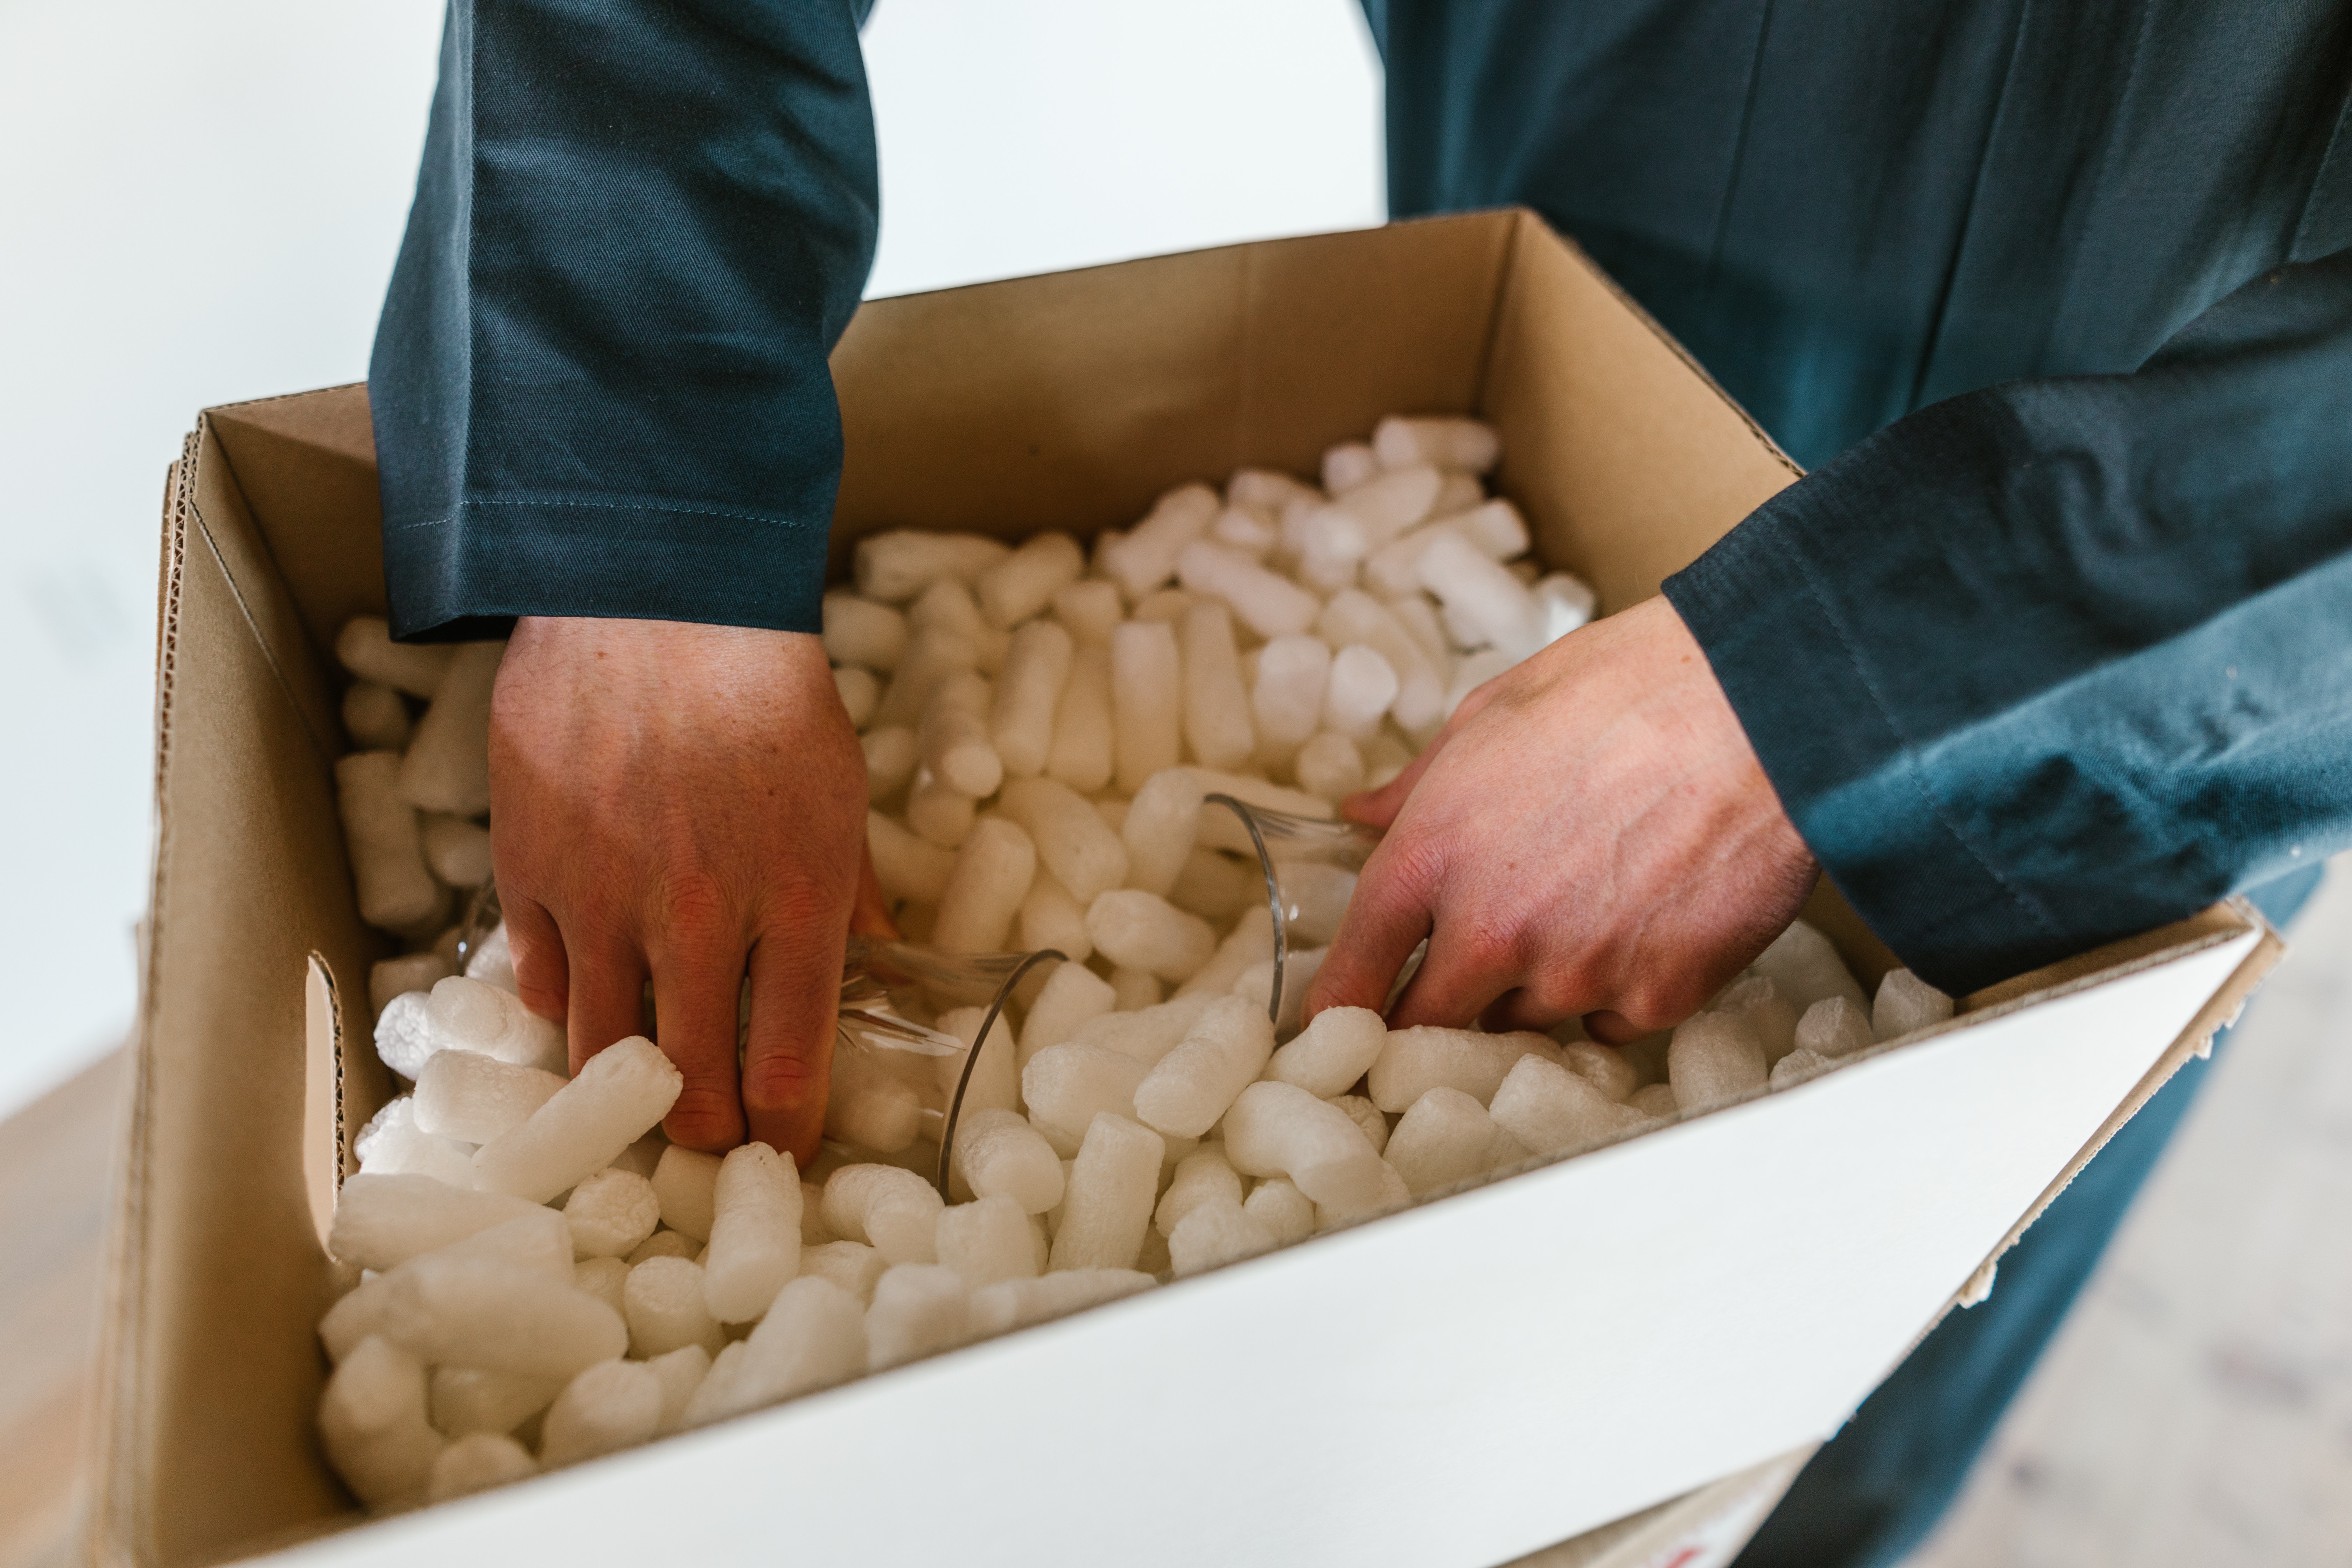 What Should Your Business Do With Polystyrene?